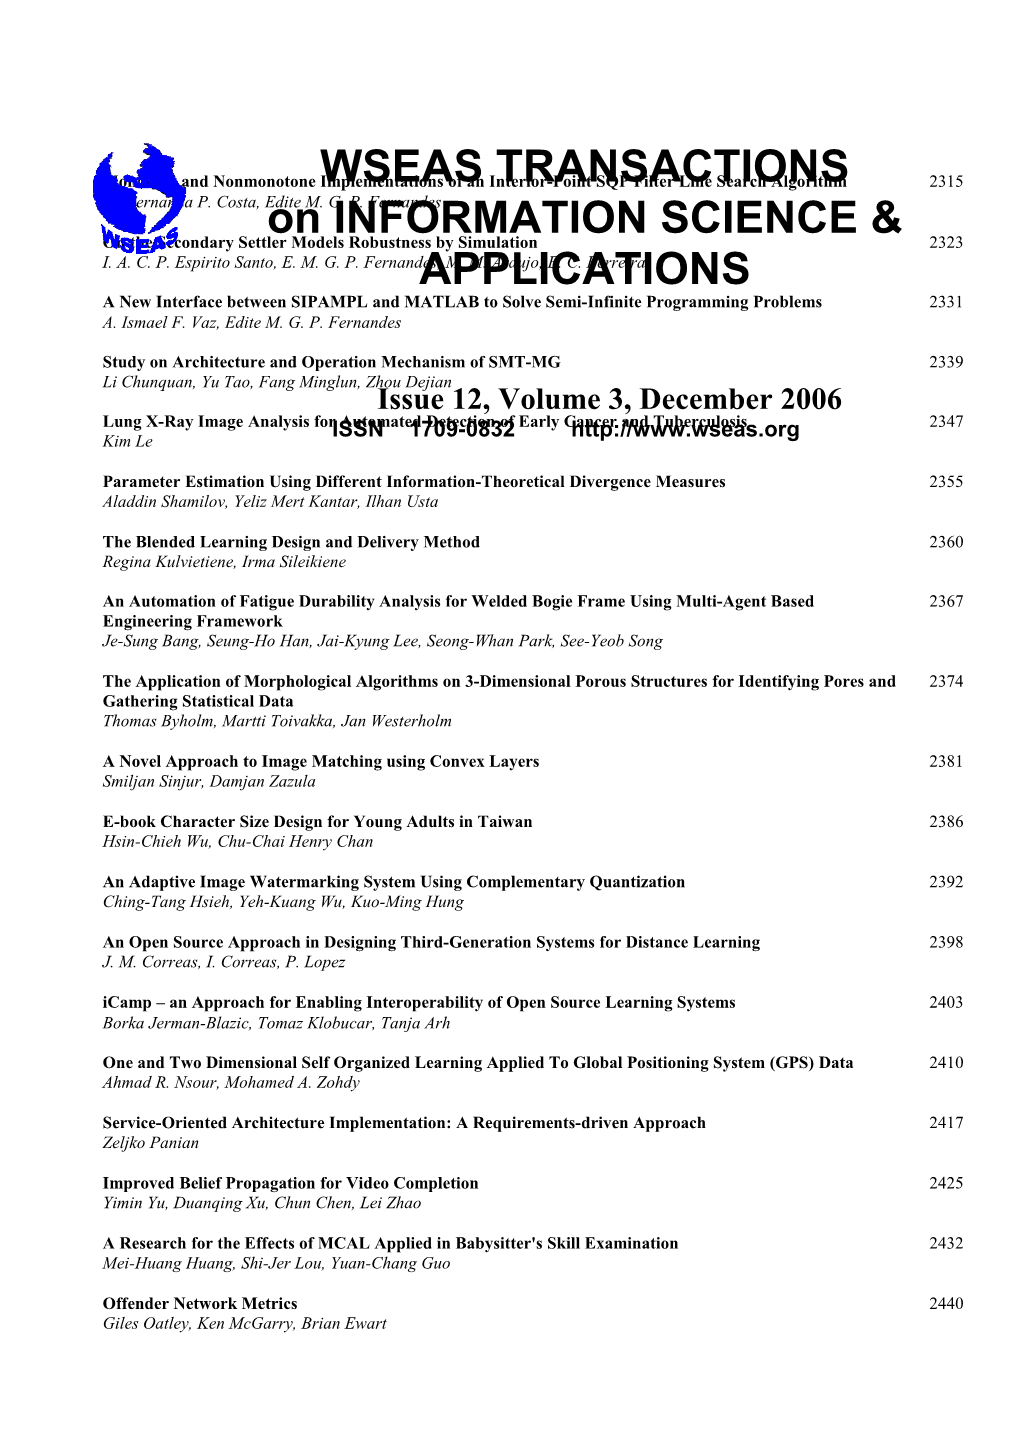 WSEAS Trans. on INFORMATION SCIENCE & APPLICATIONS, December 2006